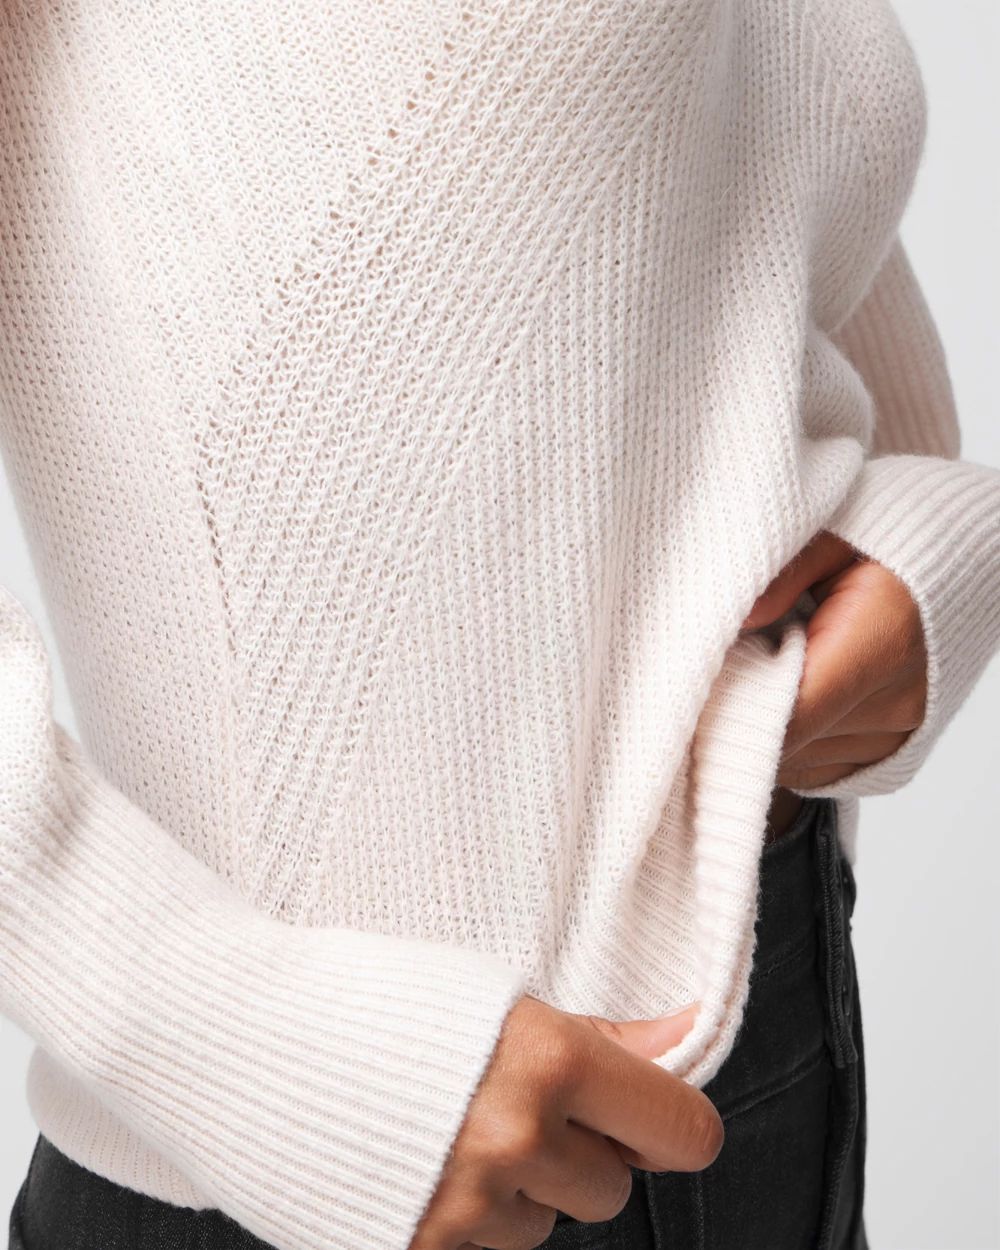 Petite Pleated Shoulder V-Neck Pull Over click to view larger image.